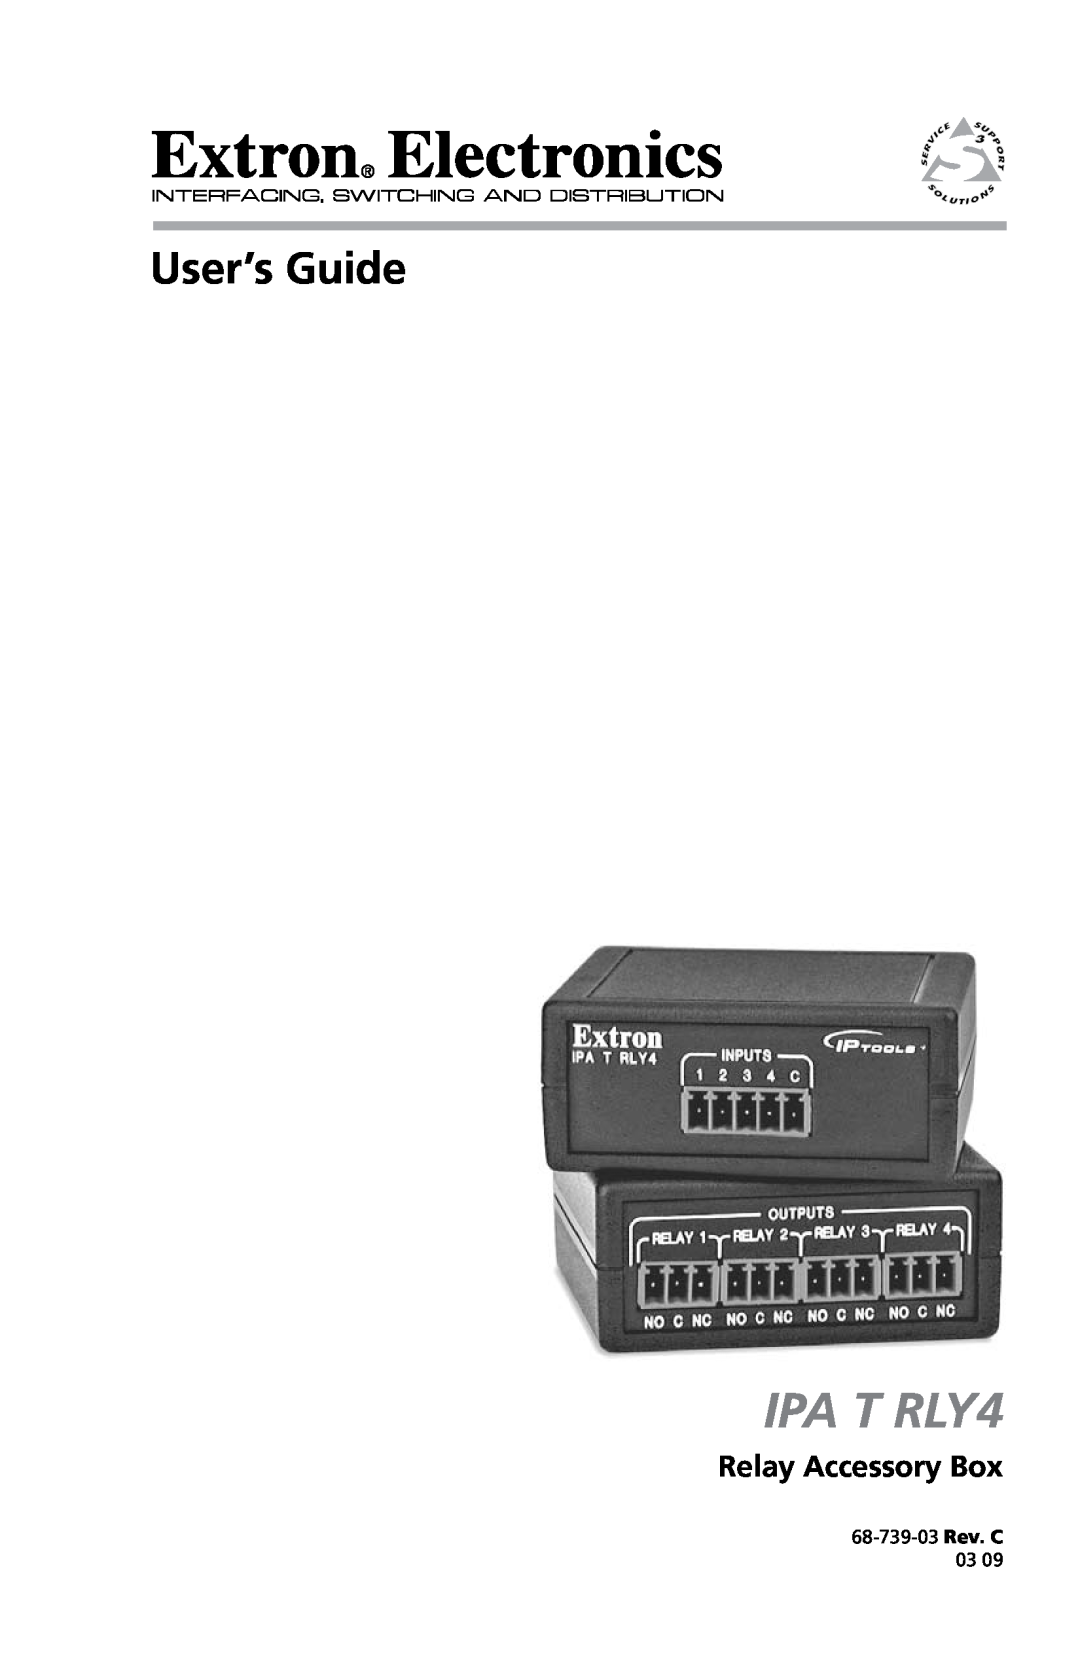 Extron electronic IPA T RLY4 specifications IP Link Accessory with Four Relays, Features, Description, Specifications 